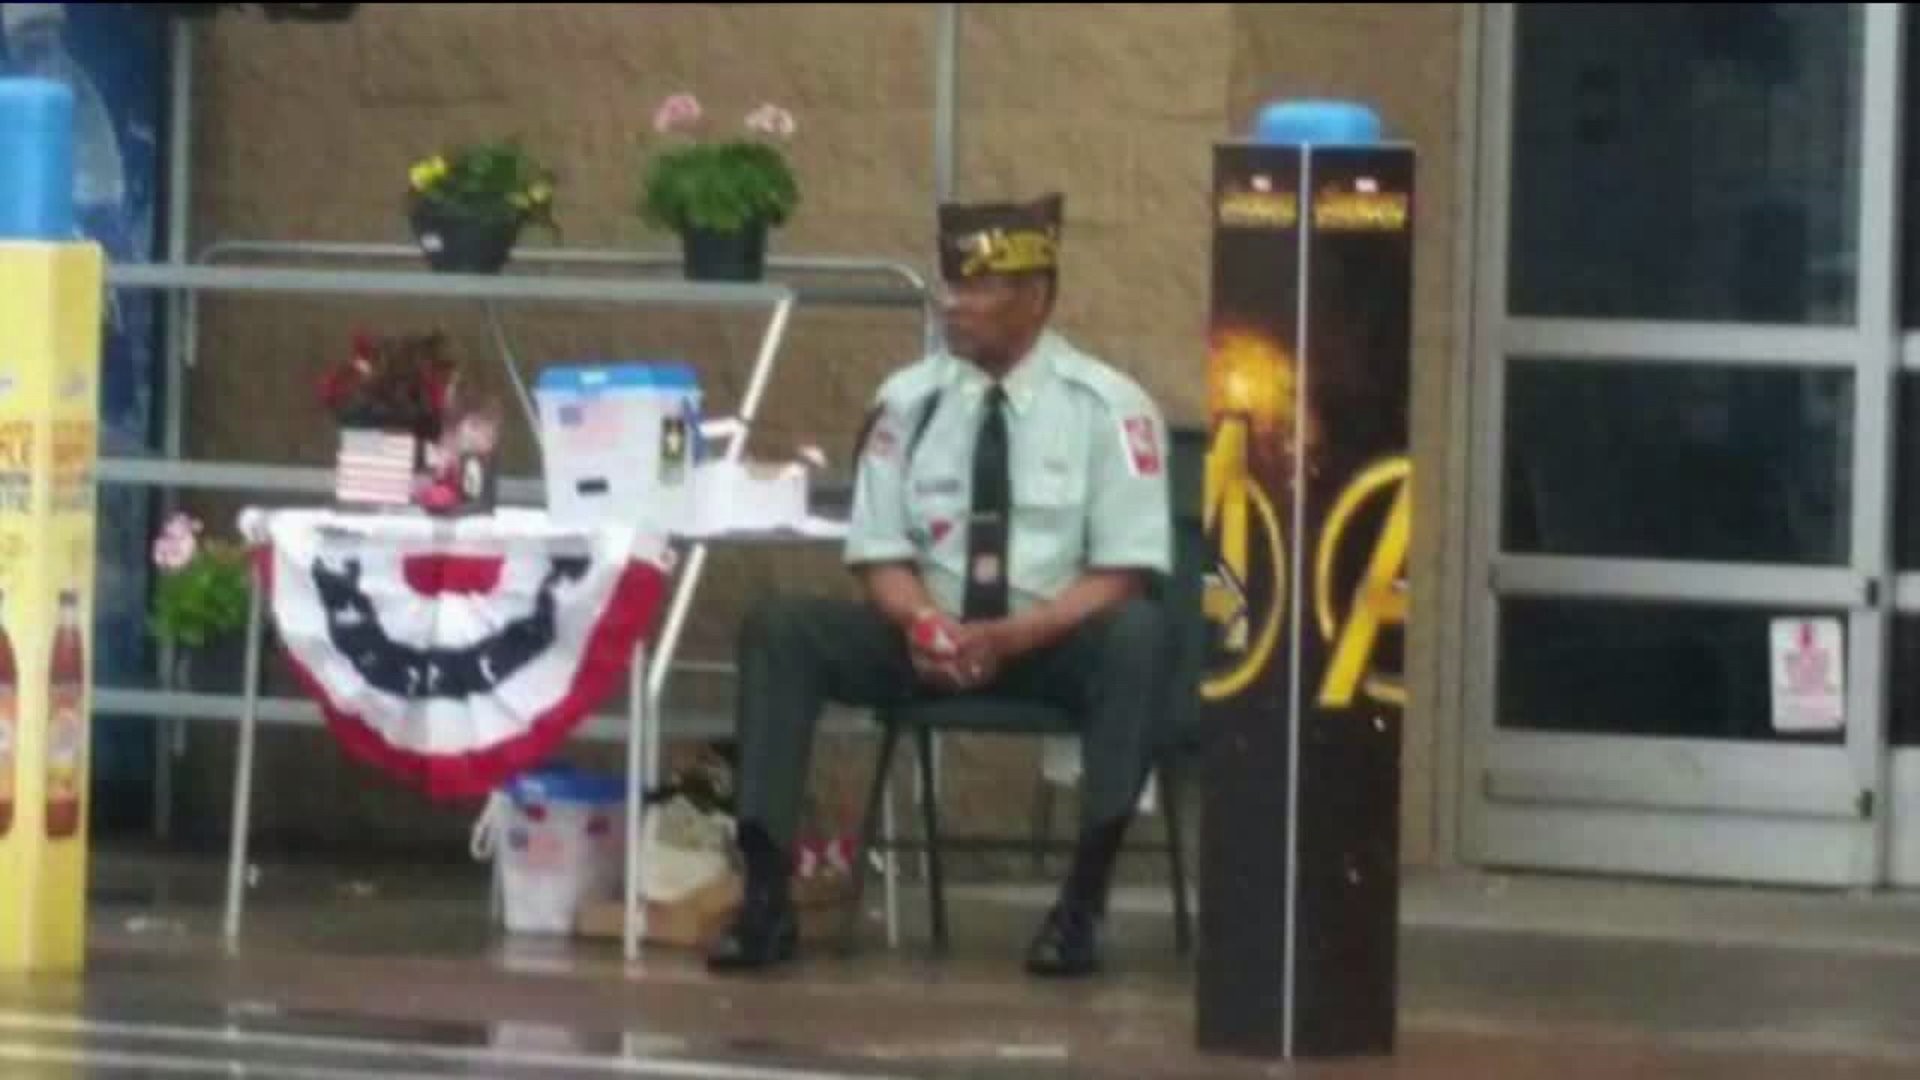 After Photo of Veteran Sitting in the Rain Goes Viral, Walmart Makes Amends